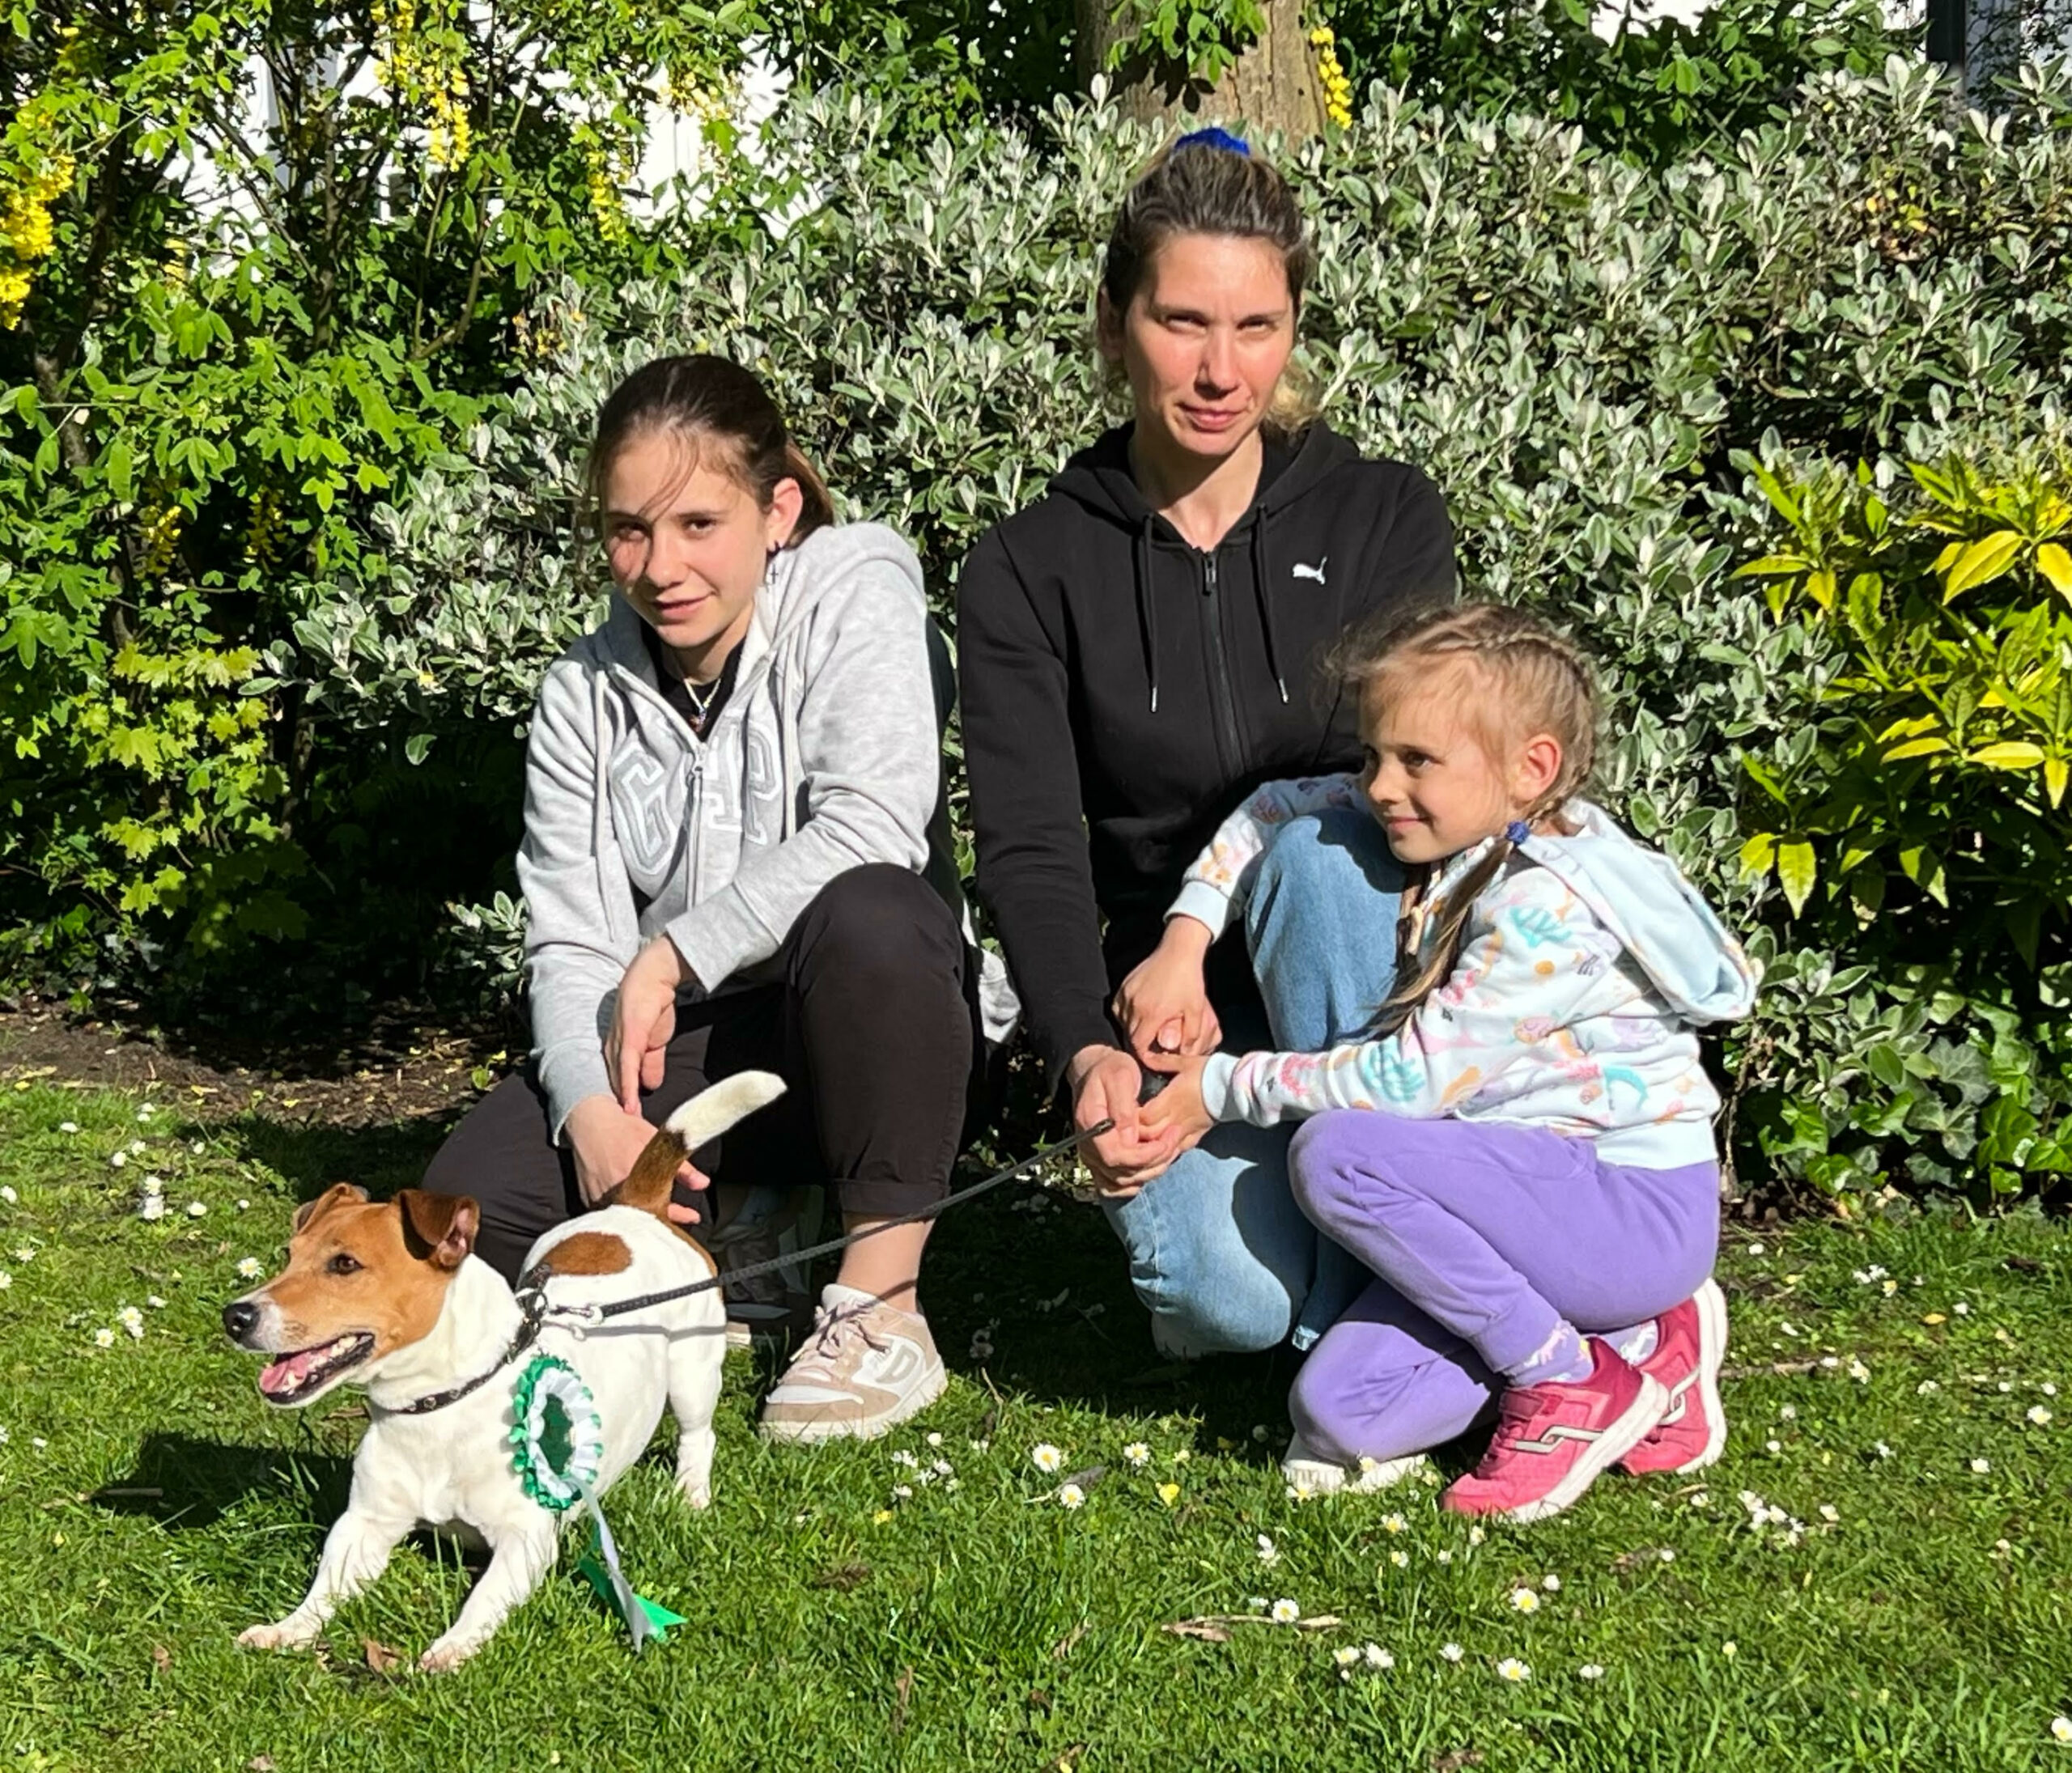 Spike, the wonder dog who has left Ukraine for a new home in Southport. Also pictured:  Mum - Dalyna Burlachenko; Elder daughter - Kristyna; Younger daughter - Kateryna